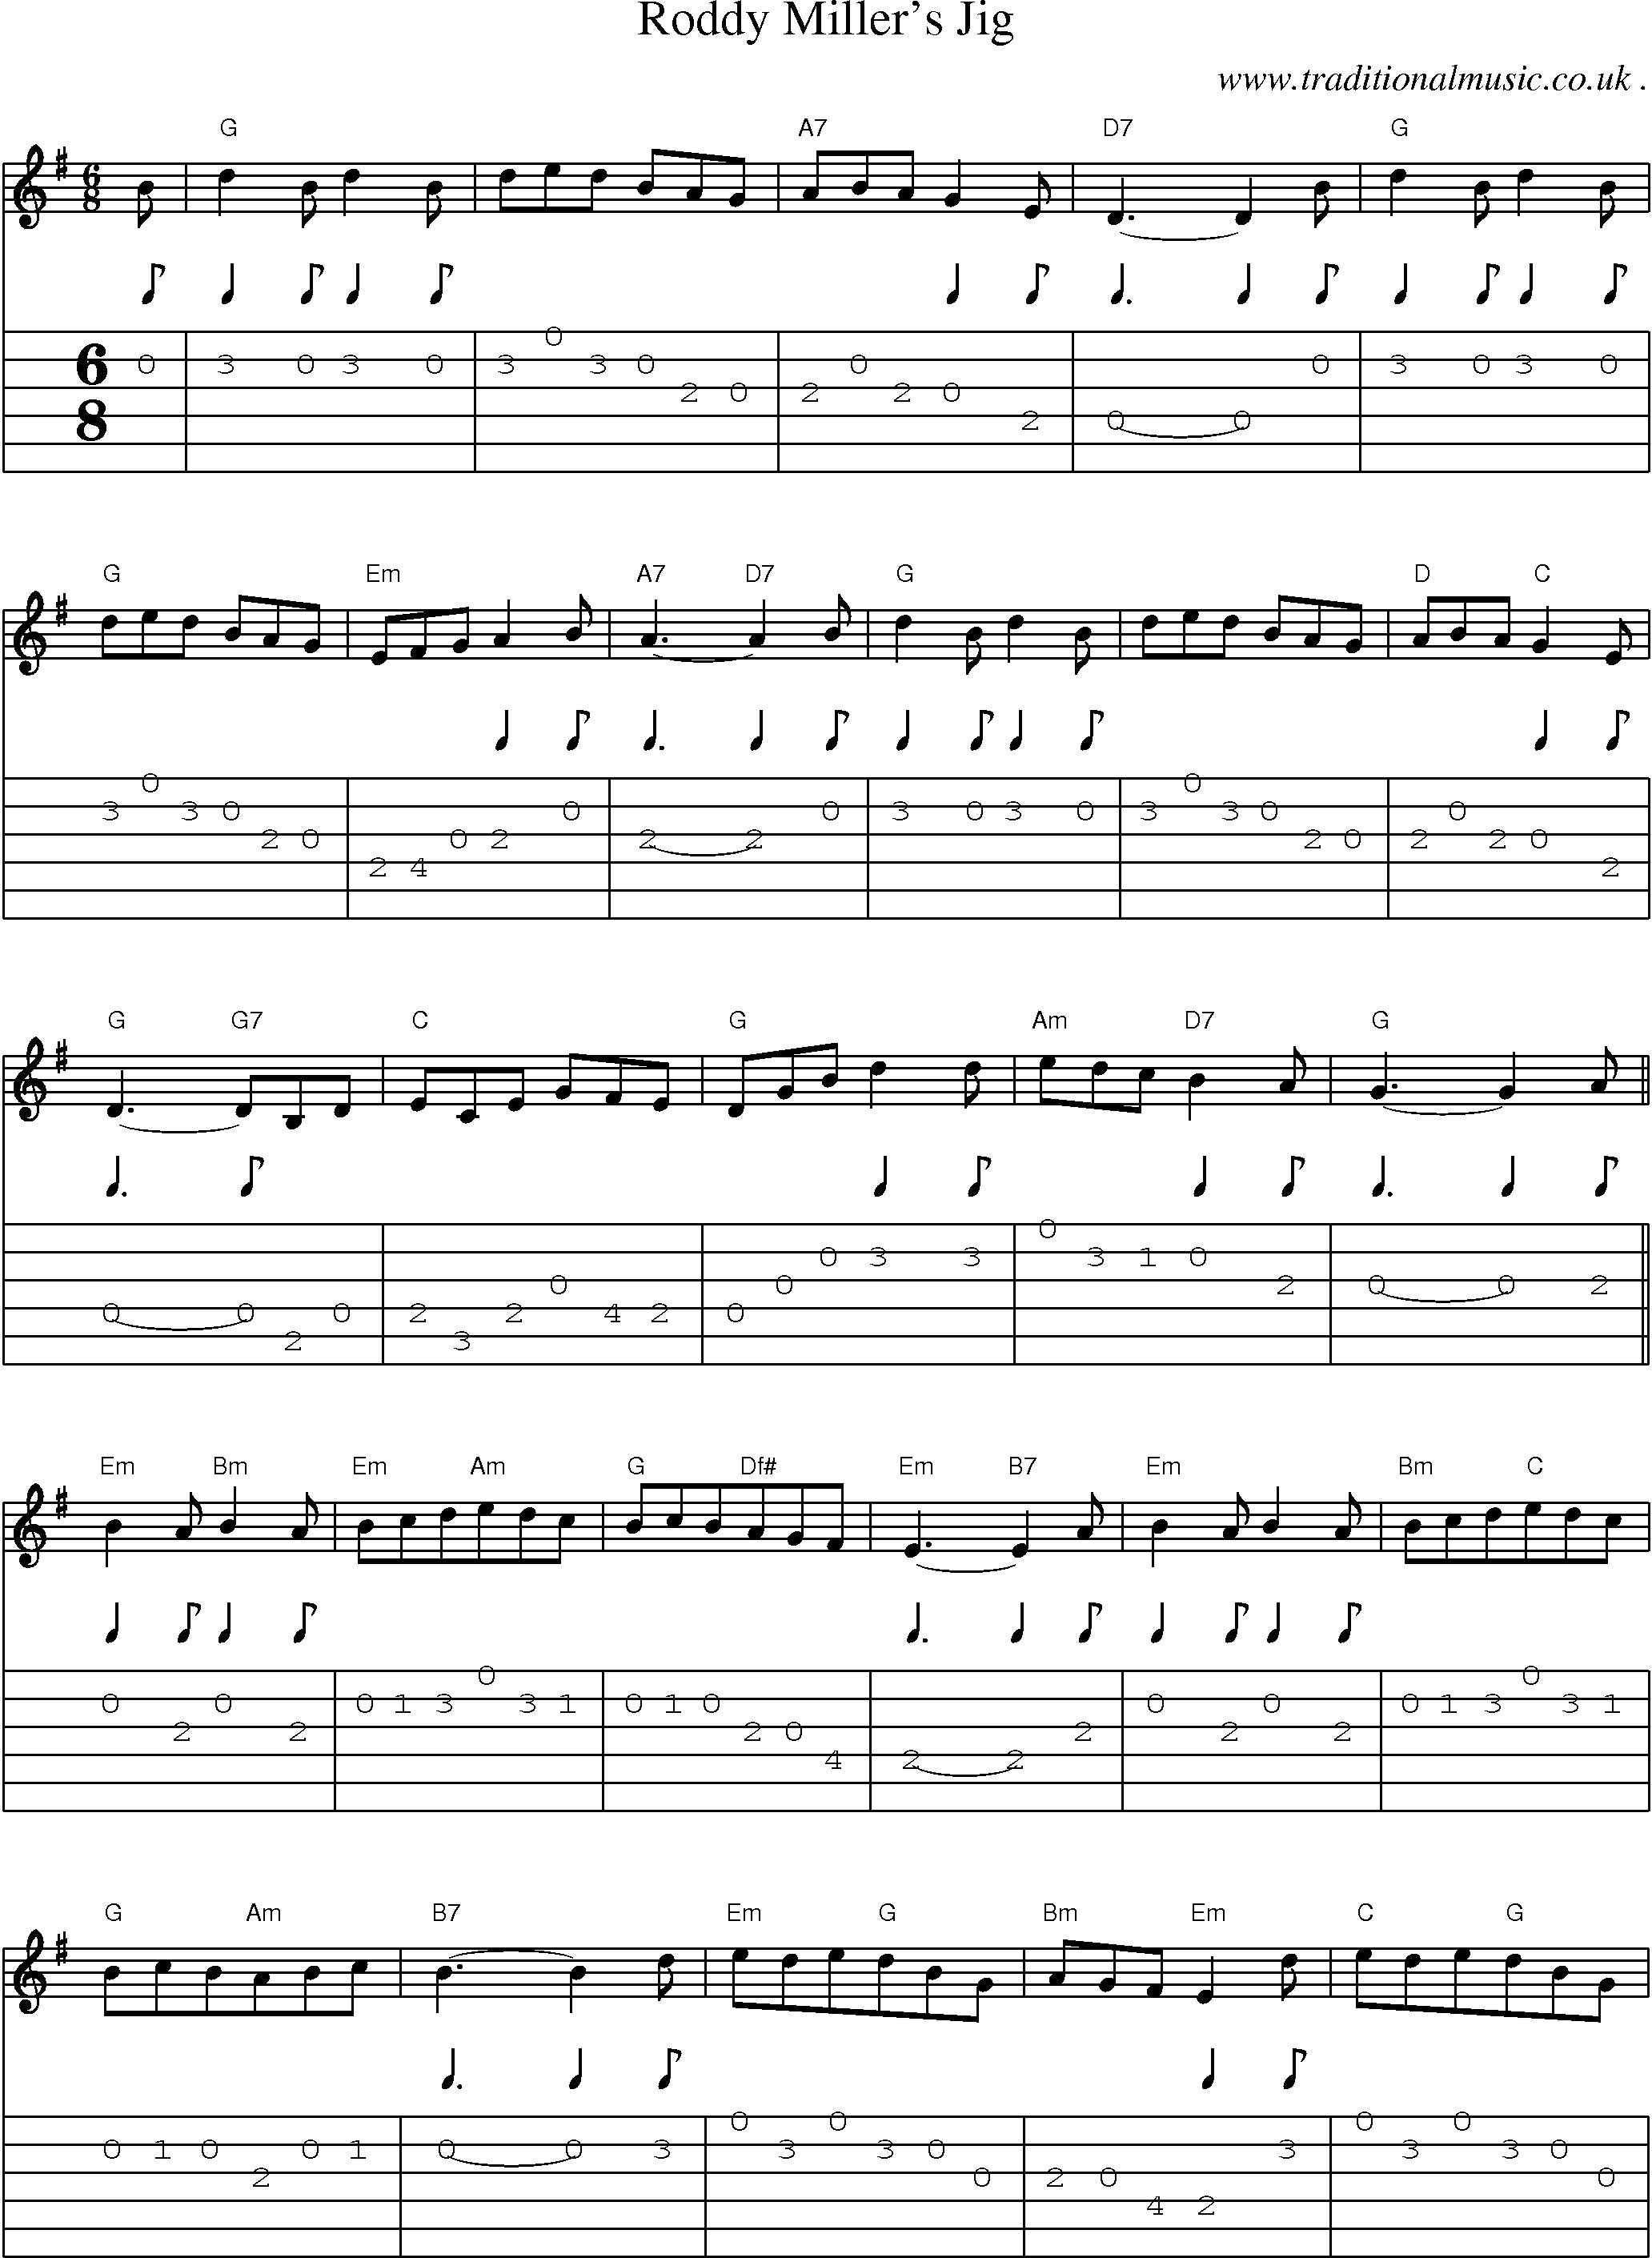 Sheet-Music and Guitar Tabs for Roddy Millers Jig